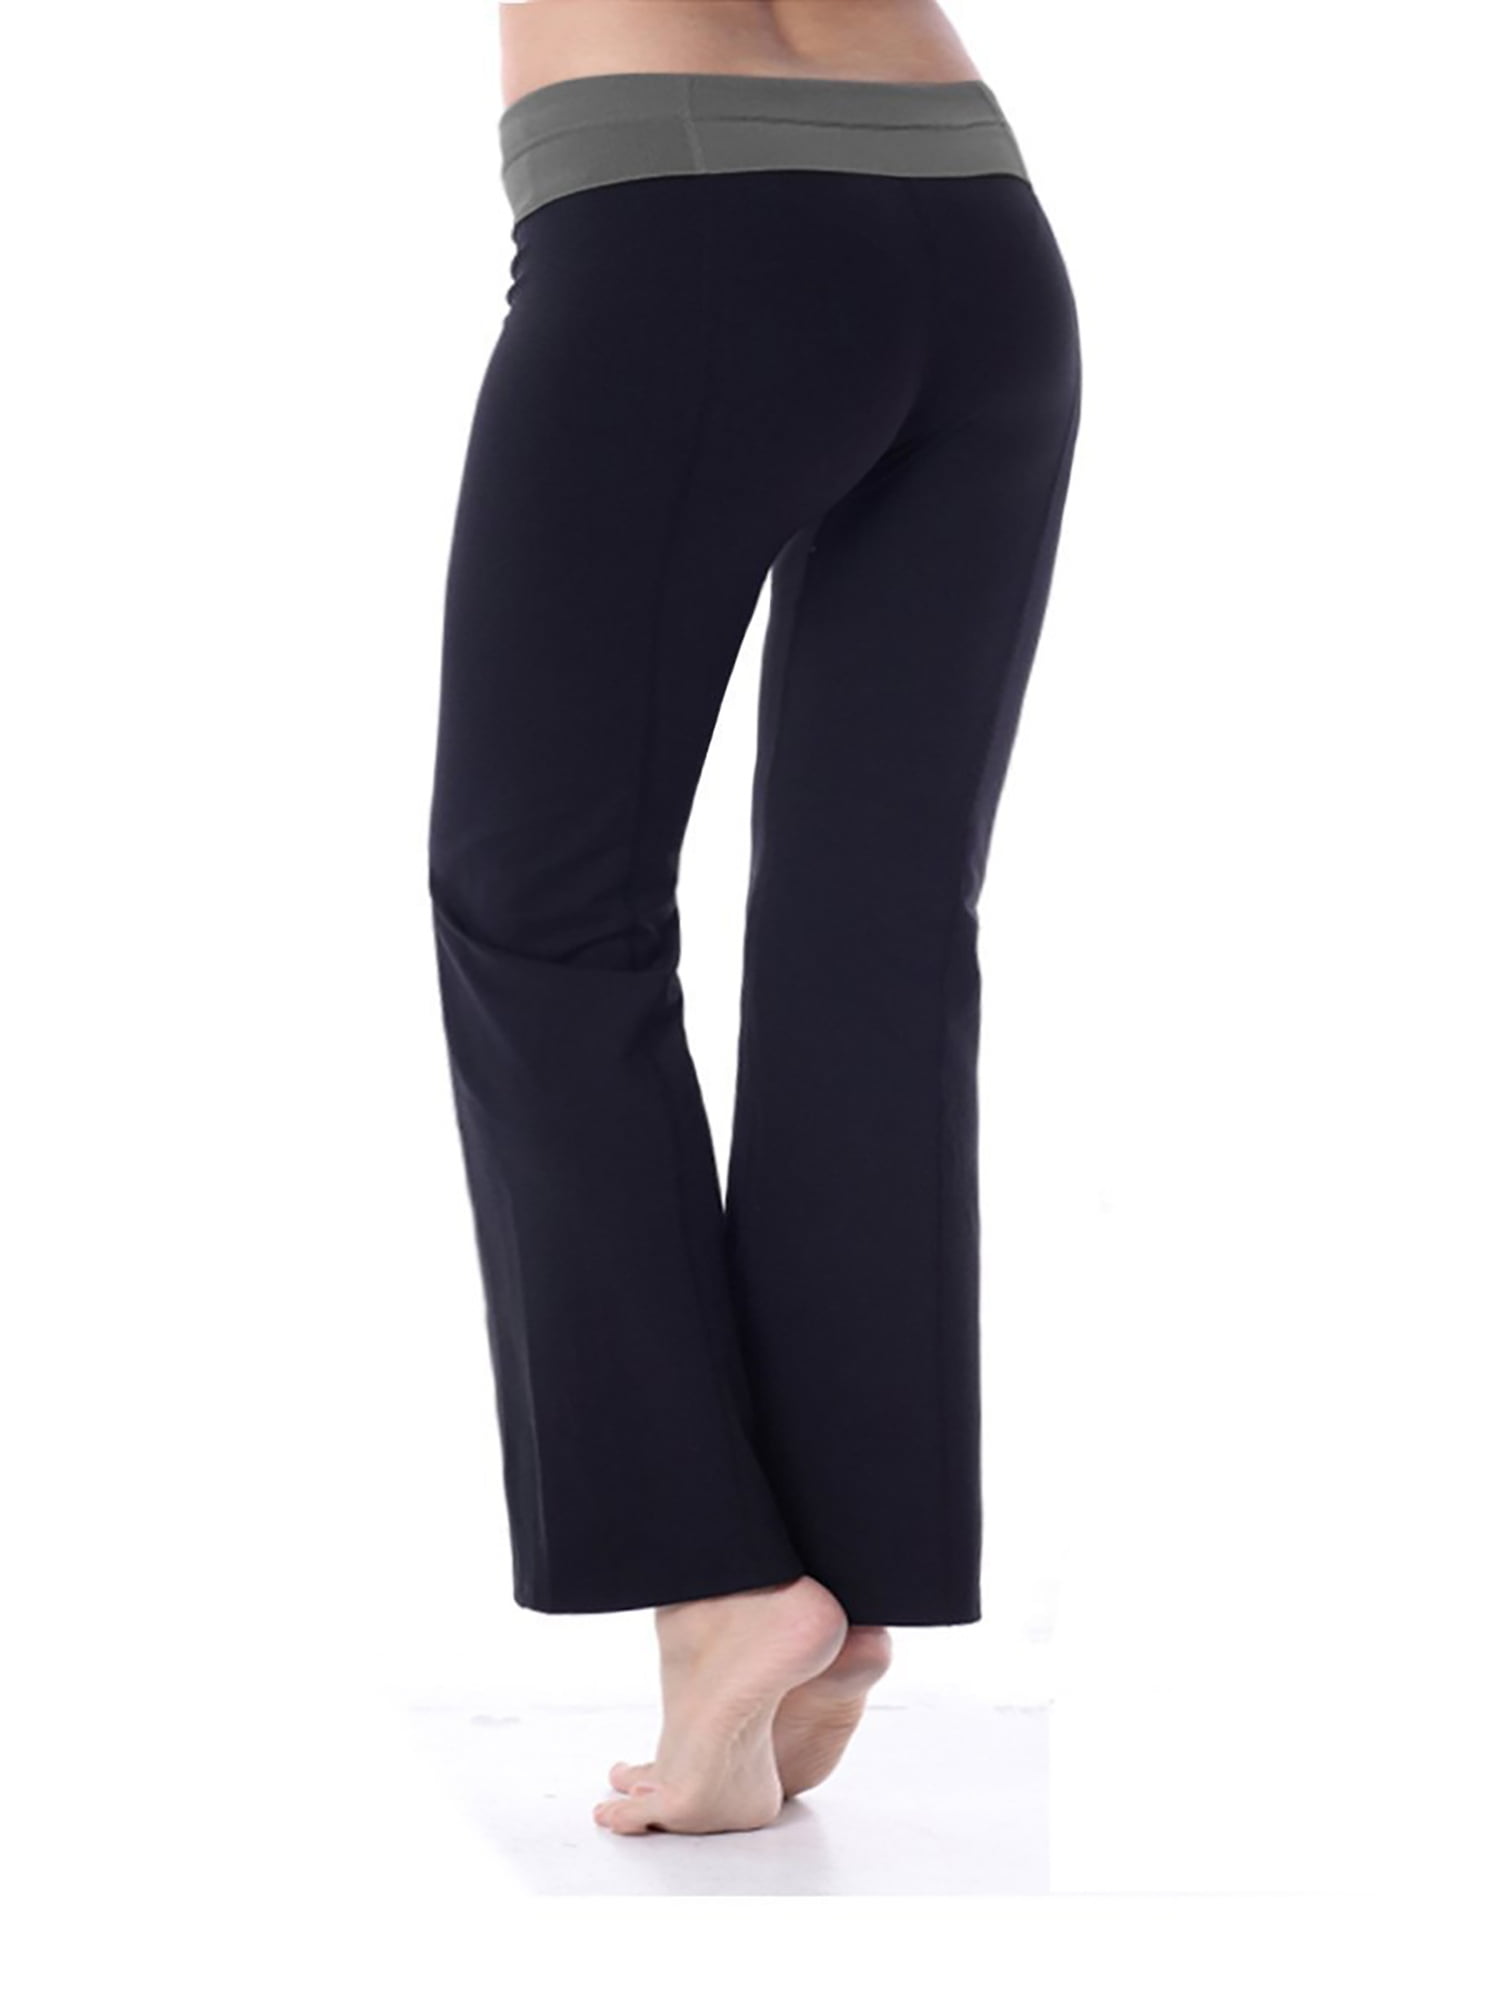 Bootcut Yoga Pants Cotton with Contrast Waistband 